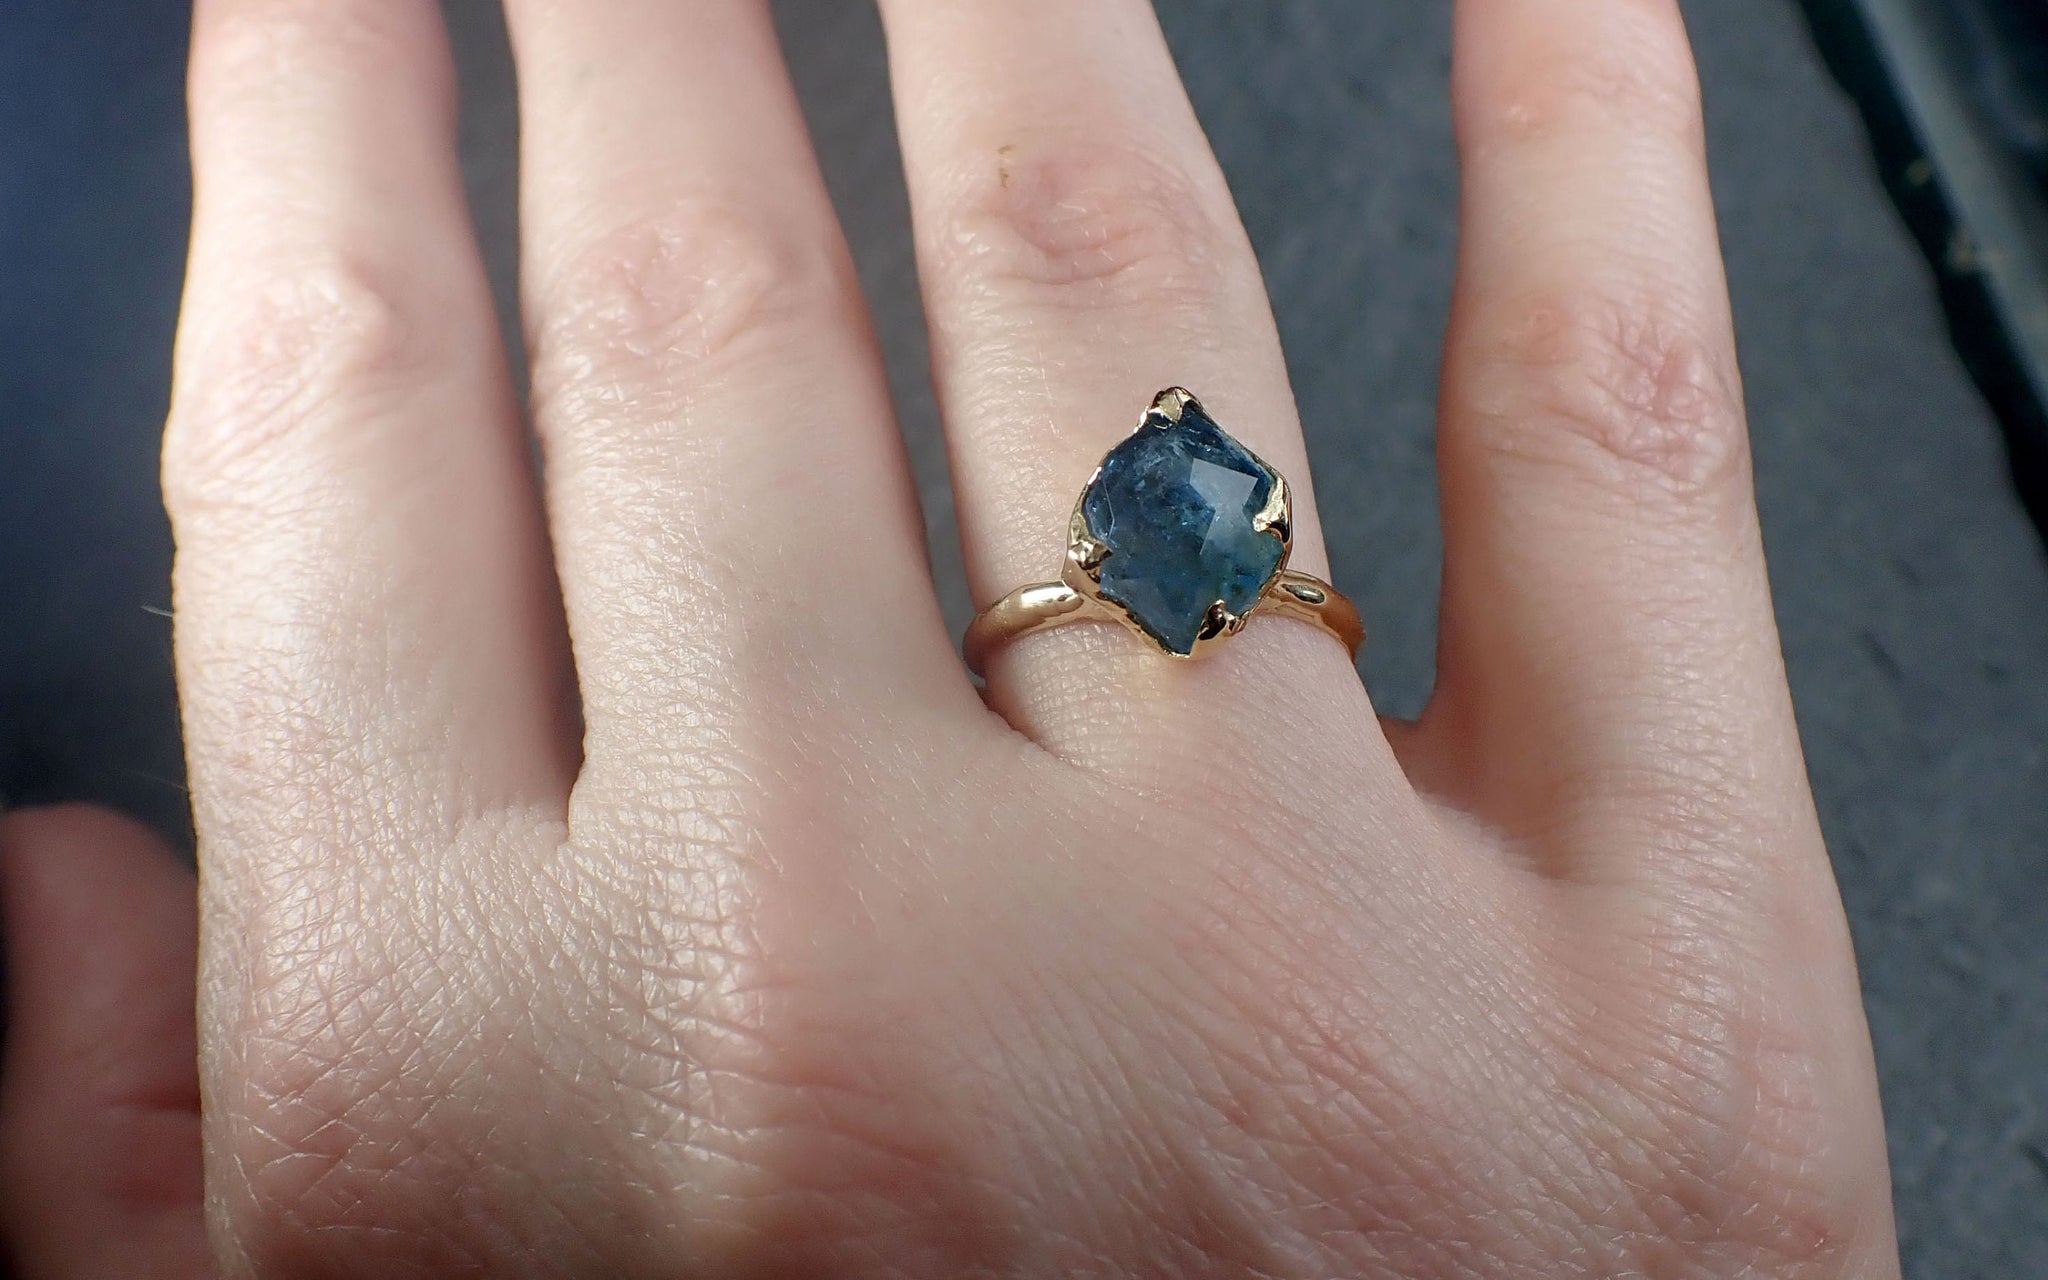 Partially faceted Aquamarine Solitaire Ring 18k gold Custom One Of a Kind Gemstone Ring Bespoke byAngeline 2982